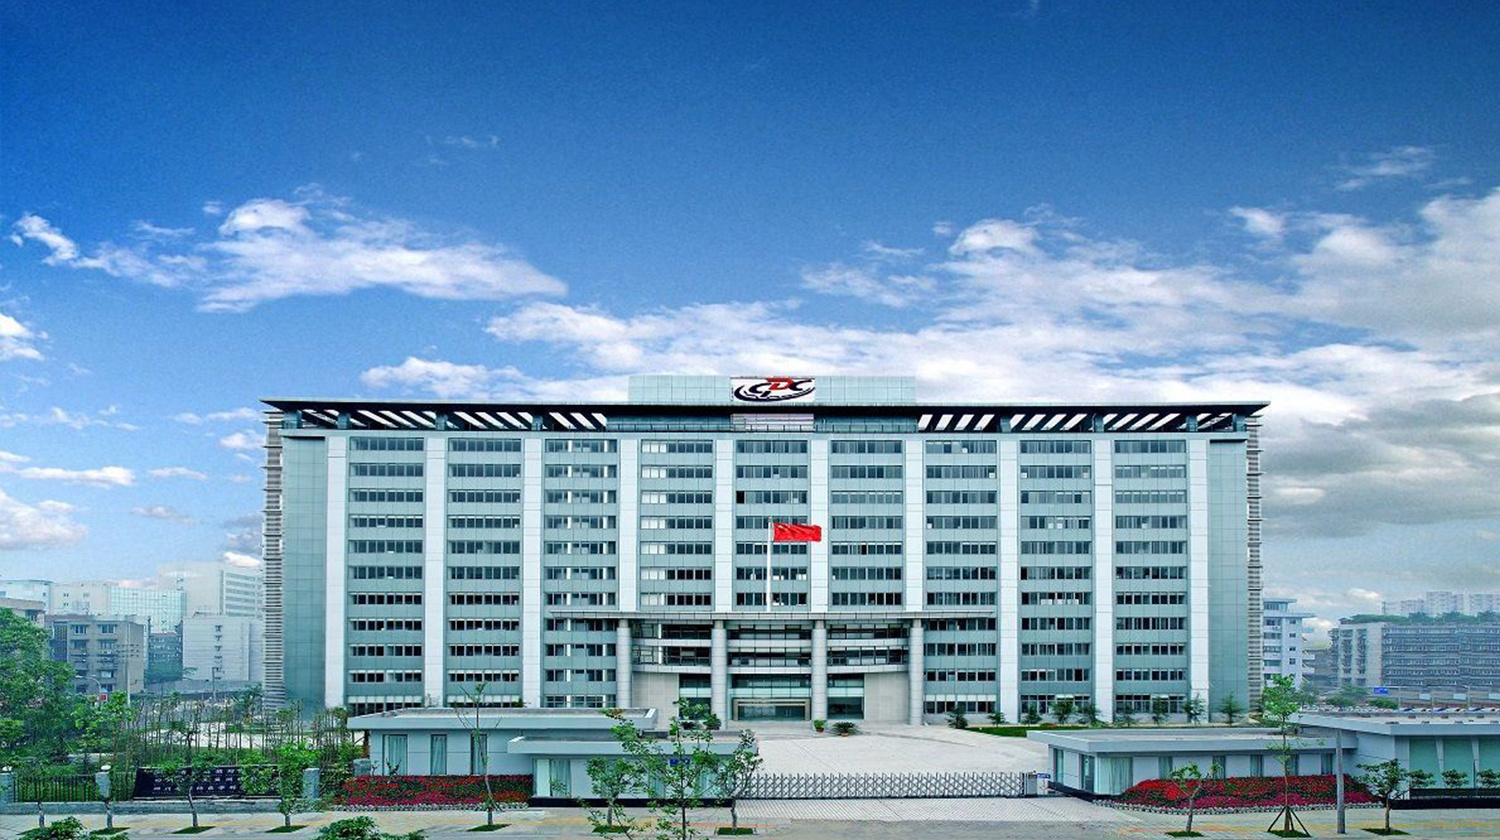 Sichuan Center for Disease Control and Prevention